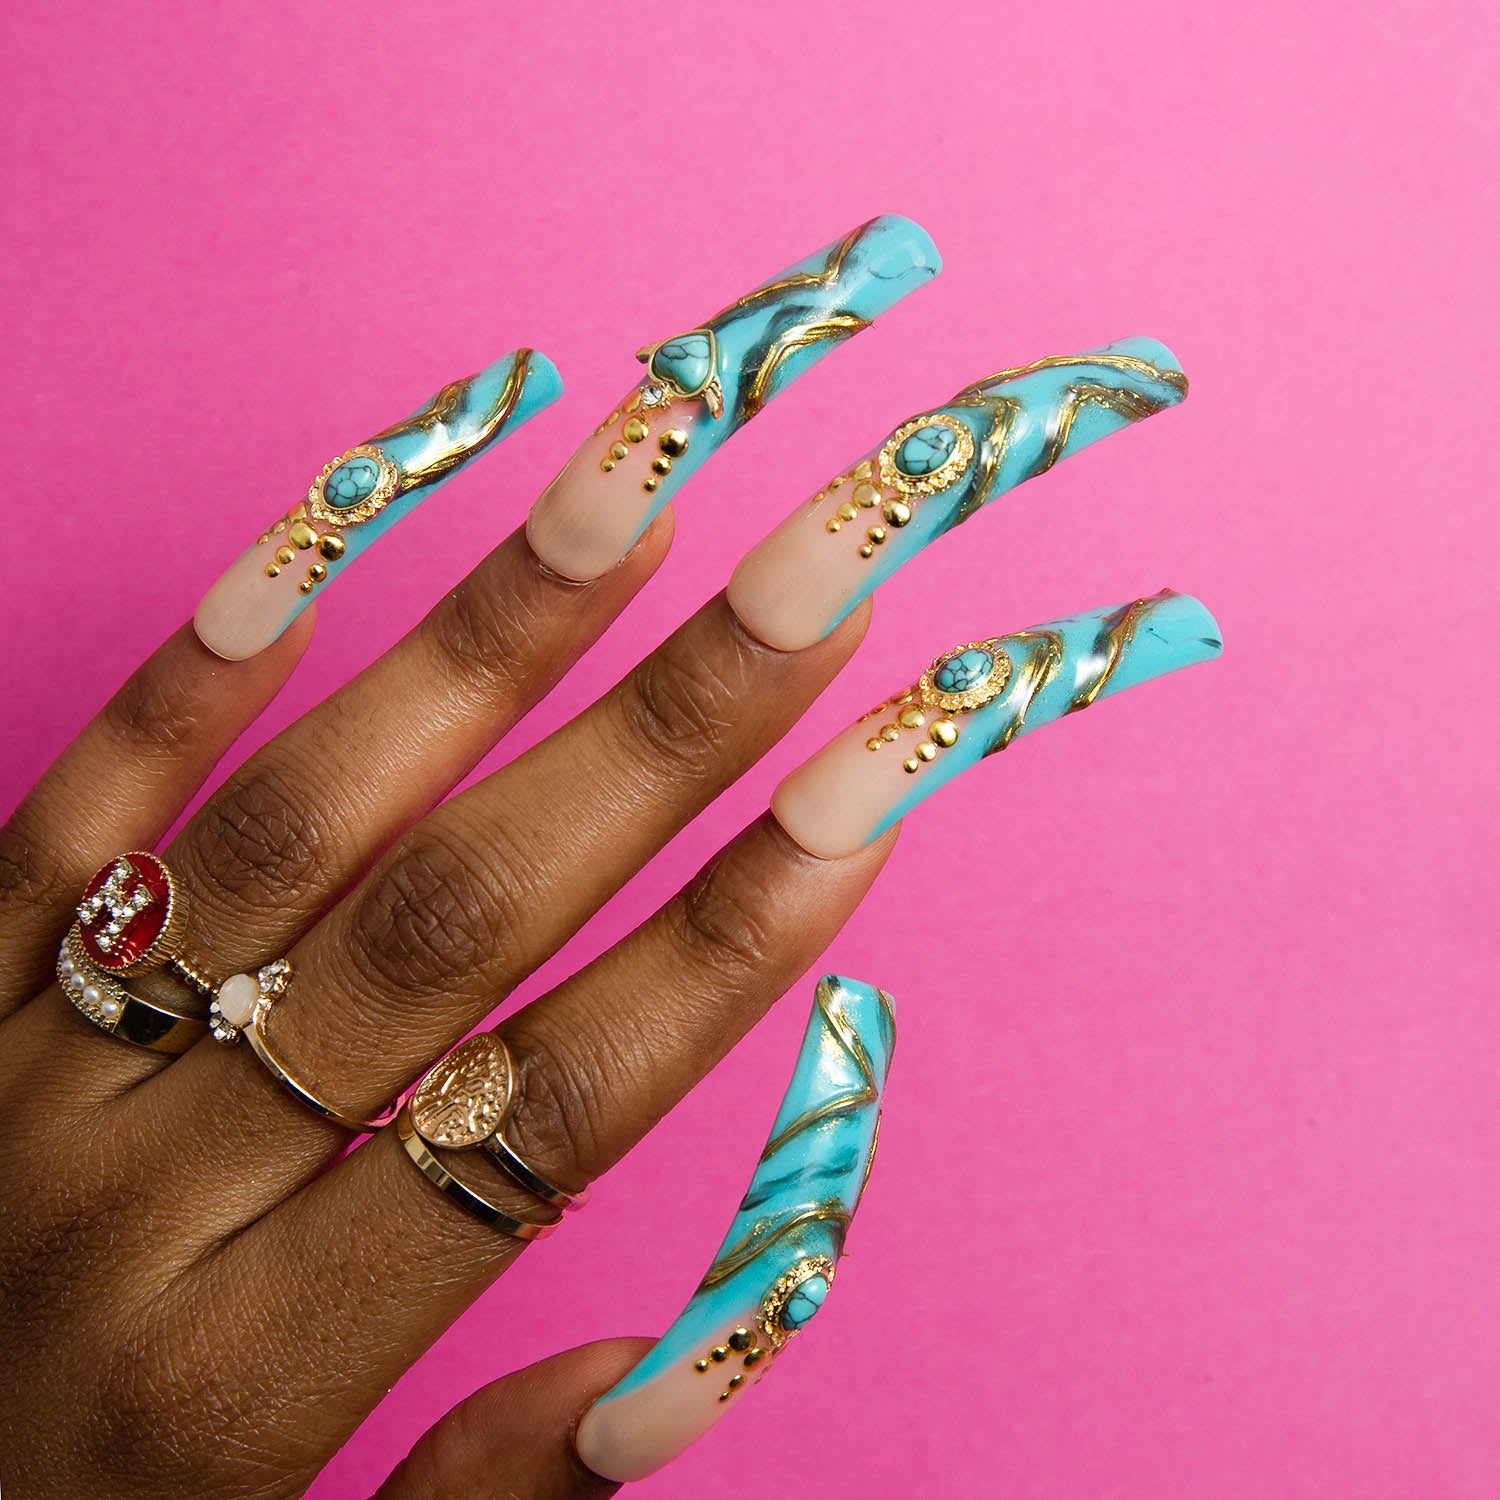 Hand with long, curved turquoise press-on acrylic nails adorned with golden decor and sparkling gems, against a pink background. The nails feature intricate designs, and the hand wears various rings including a red gemstone ring, a pearl ring, and a gold signet ring.